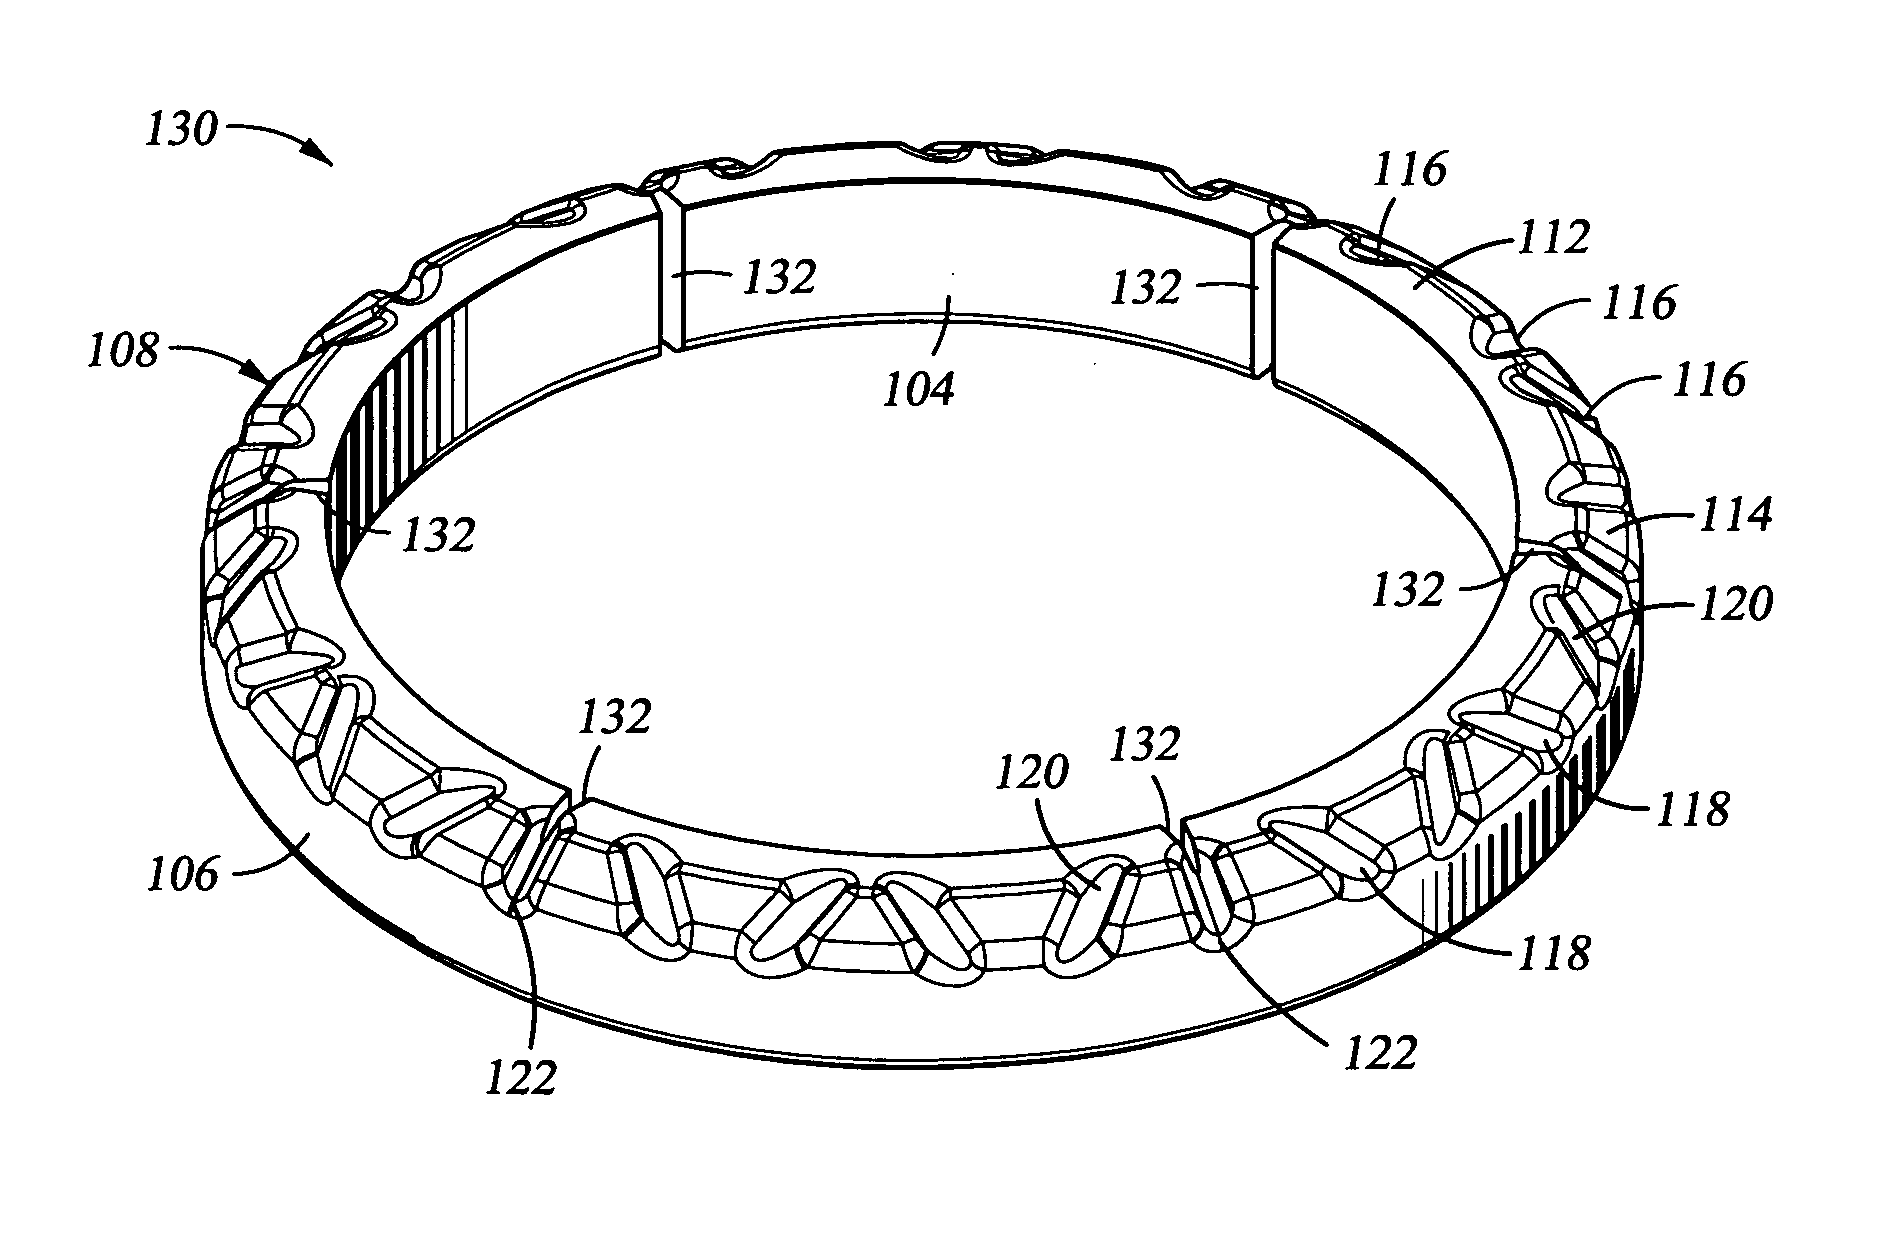 Drill bit arcuate-shaped inserts with cutting edges and method of manufacture